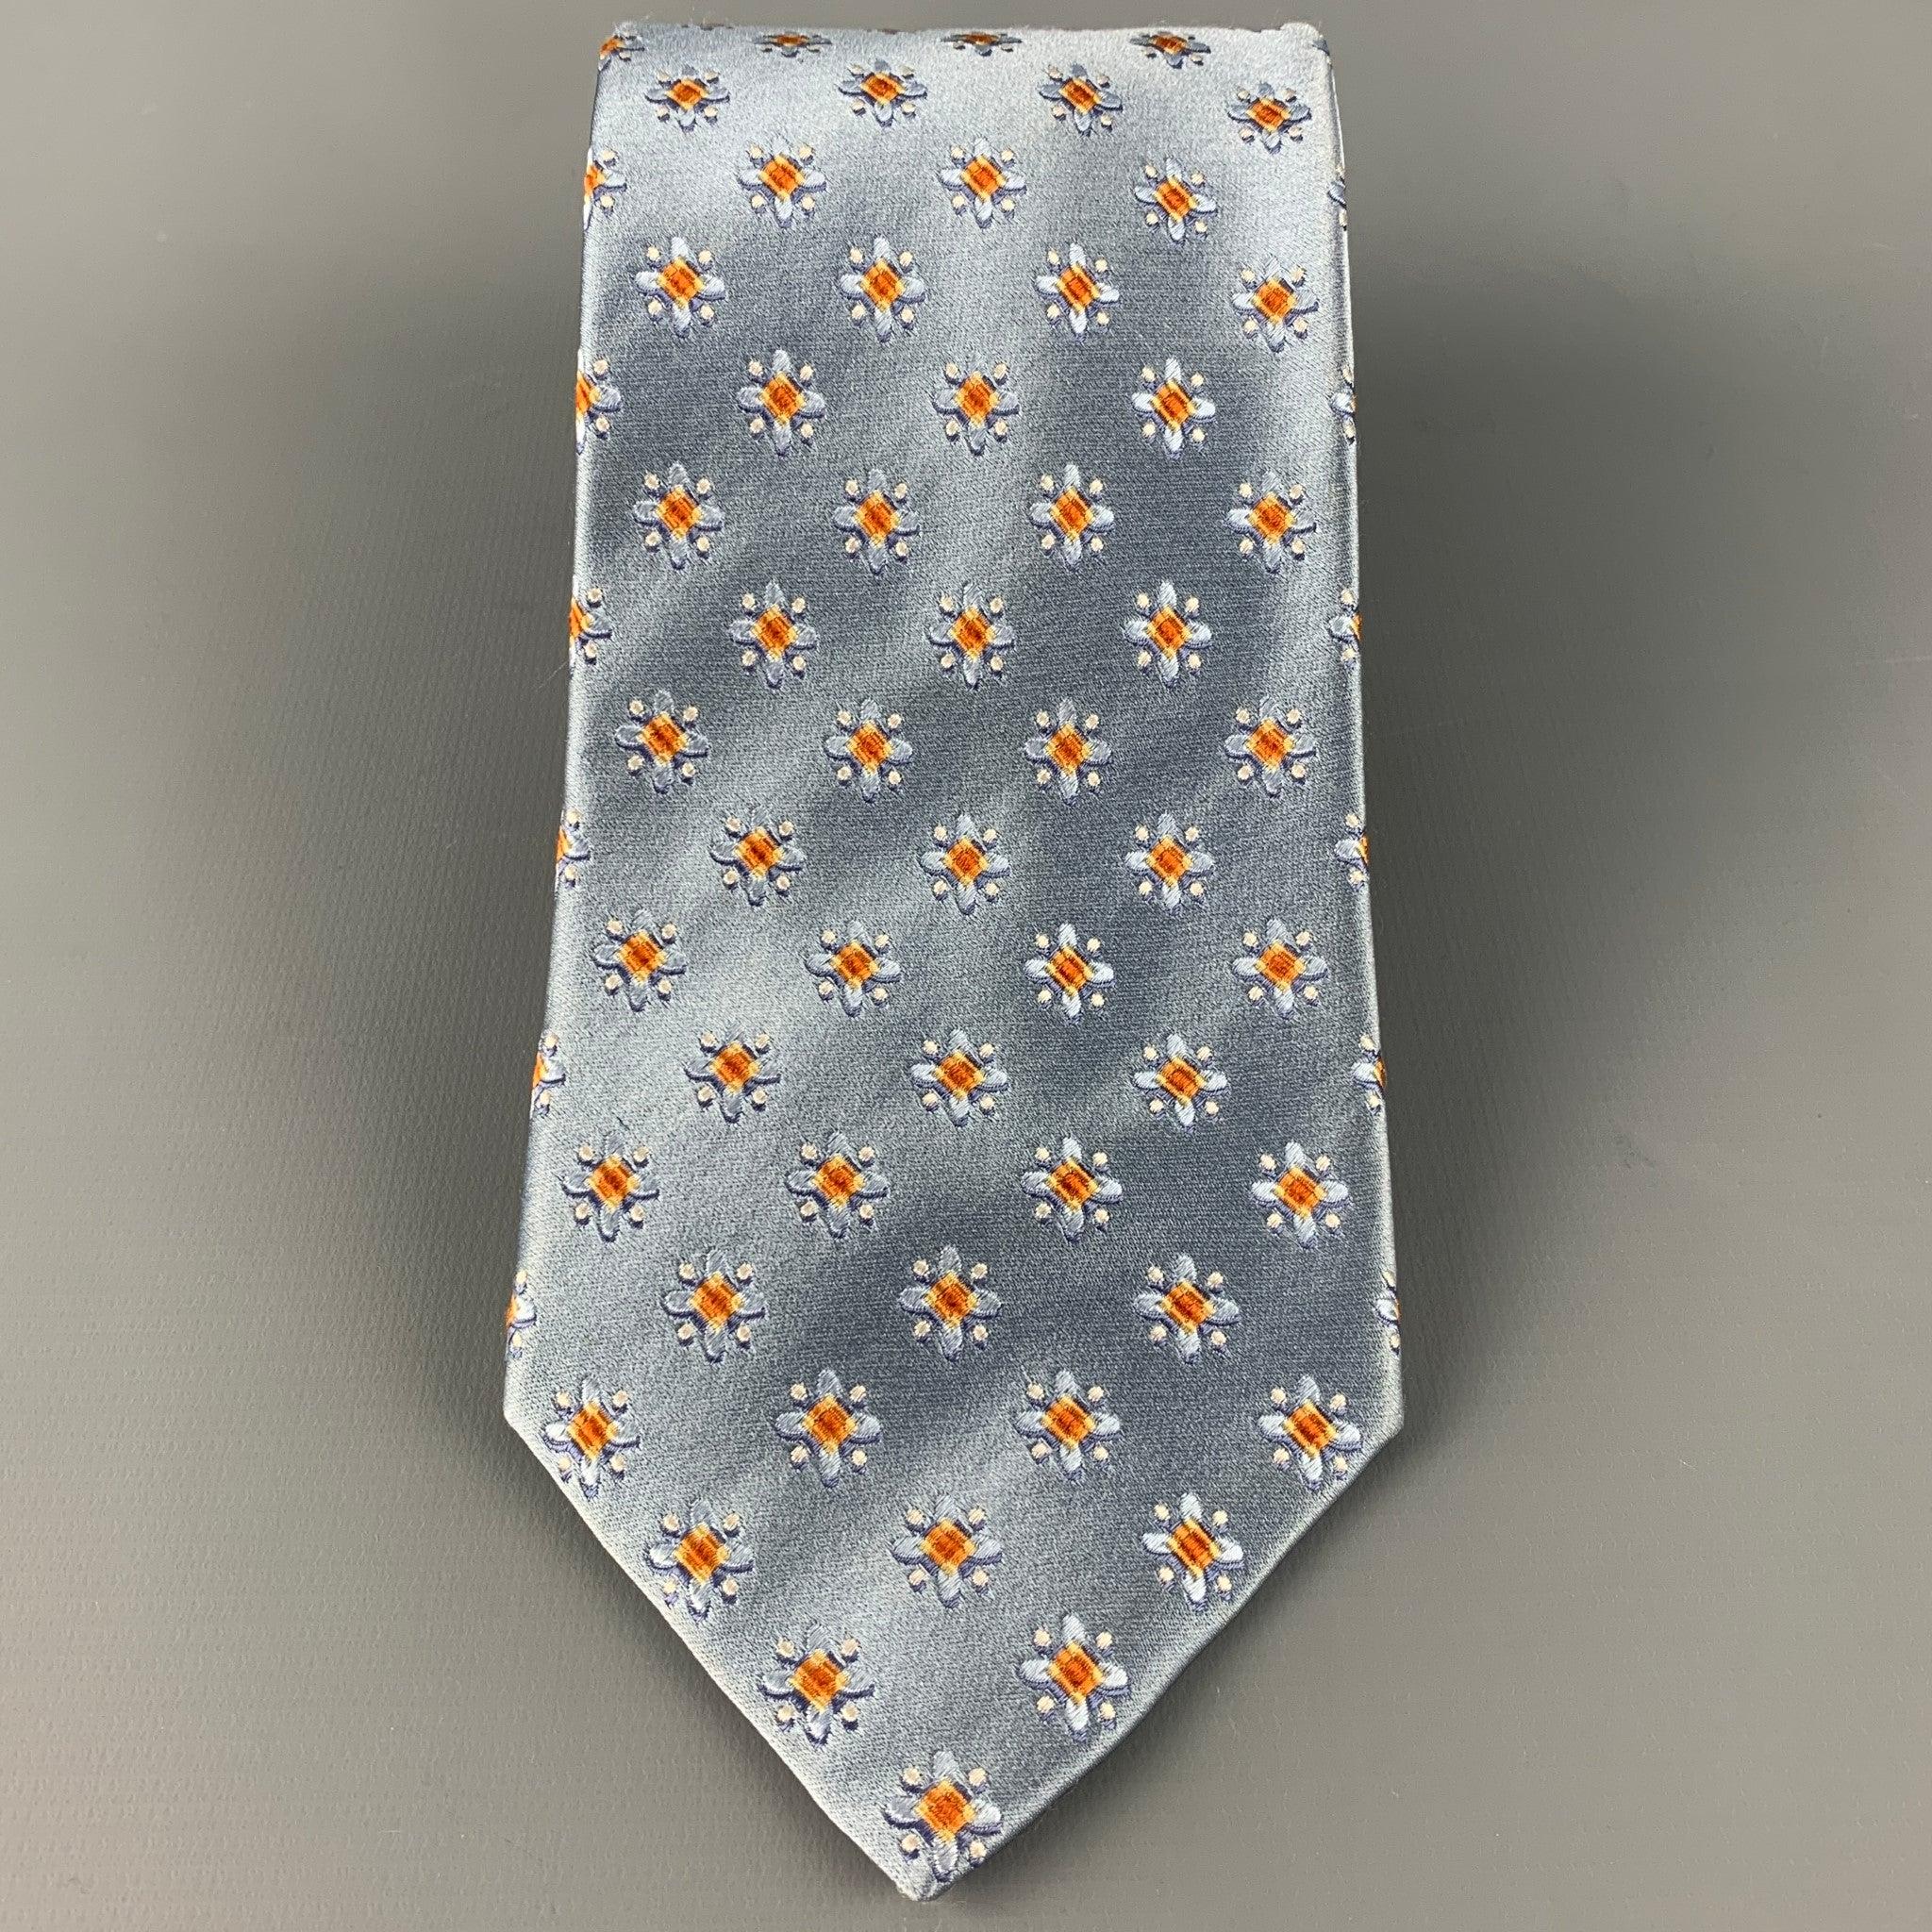 ERMENEGILDO ZEGNA
tie in a blue silk satin, featuring an orange abstract floral pattern. Made in Italy.Very Good Pre-Owned Condition. 

Measurements: 
  Width: 3. inches Length: 60 inches 
  
  
 
Reference: 126573
Category: Tie
More Details
   